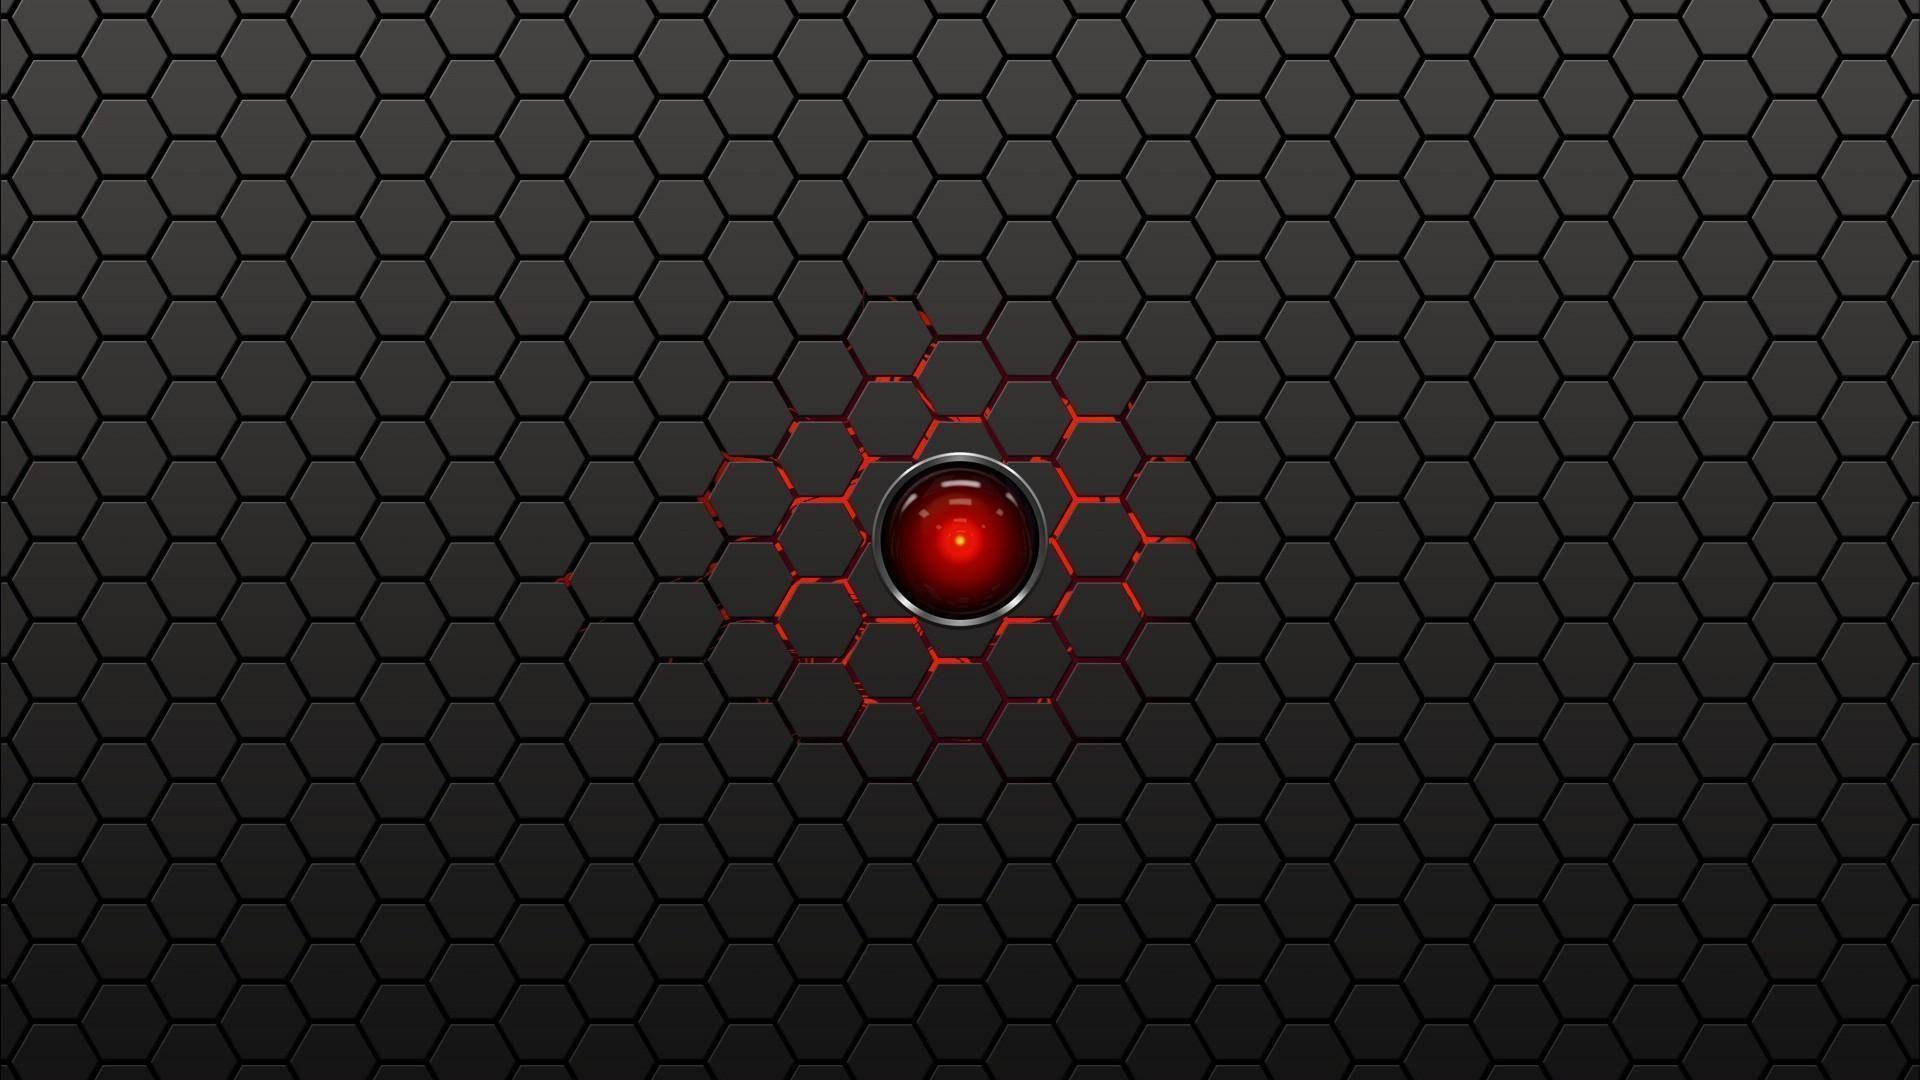 Space odyssey artificial intelligence hal9000 hex computers